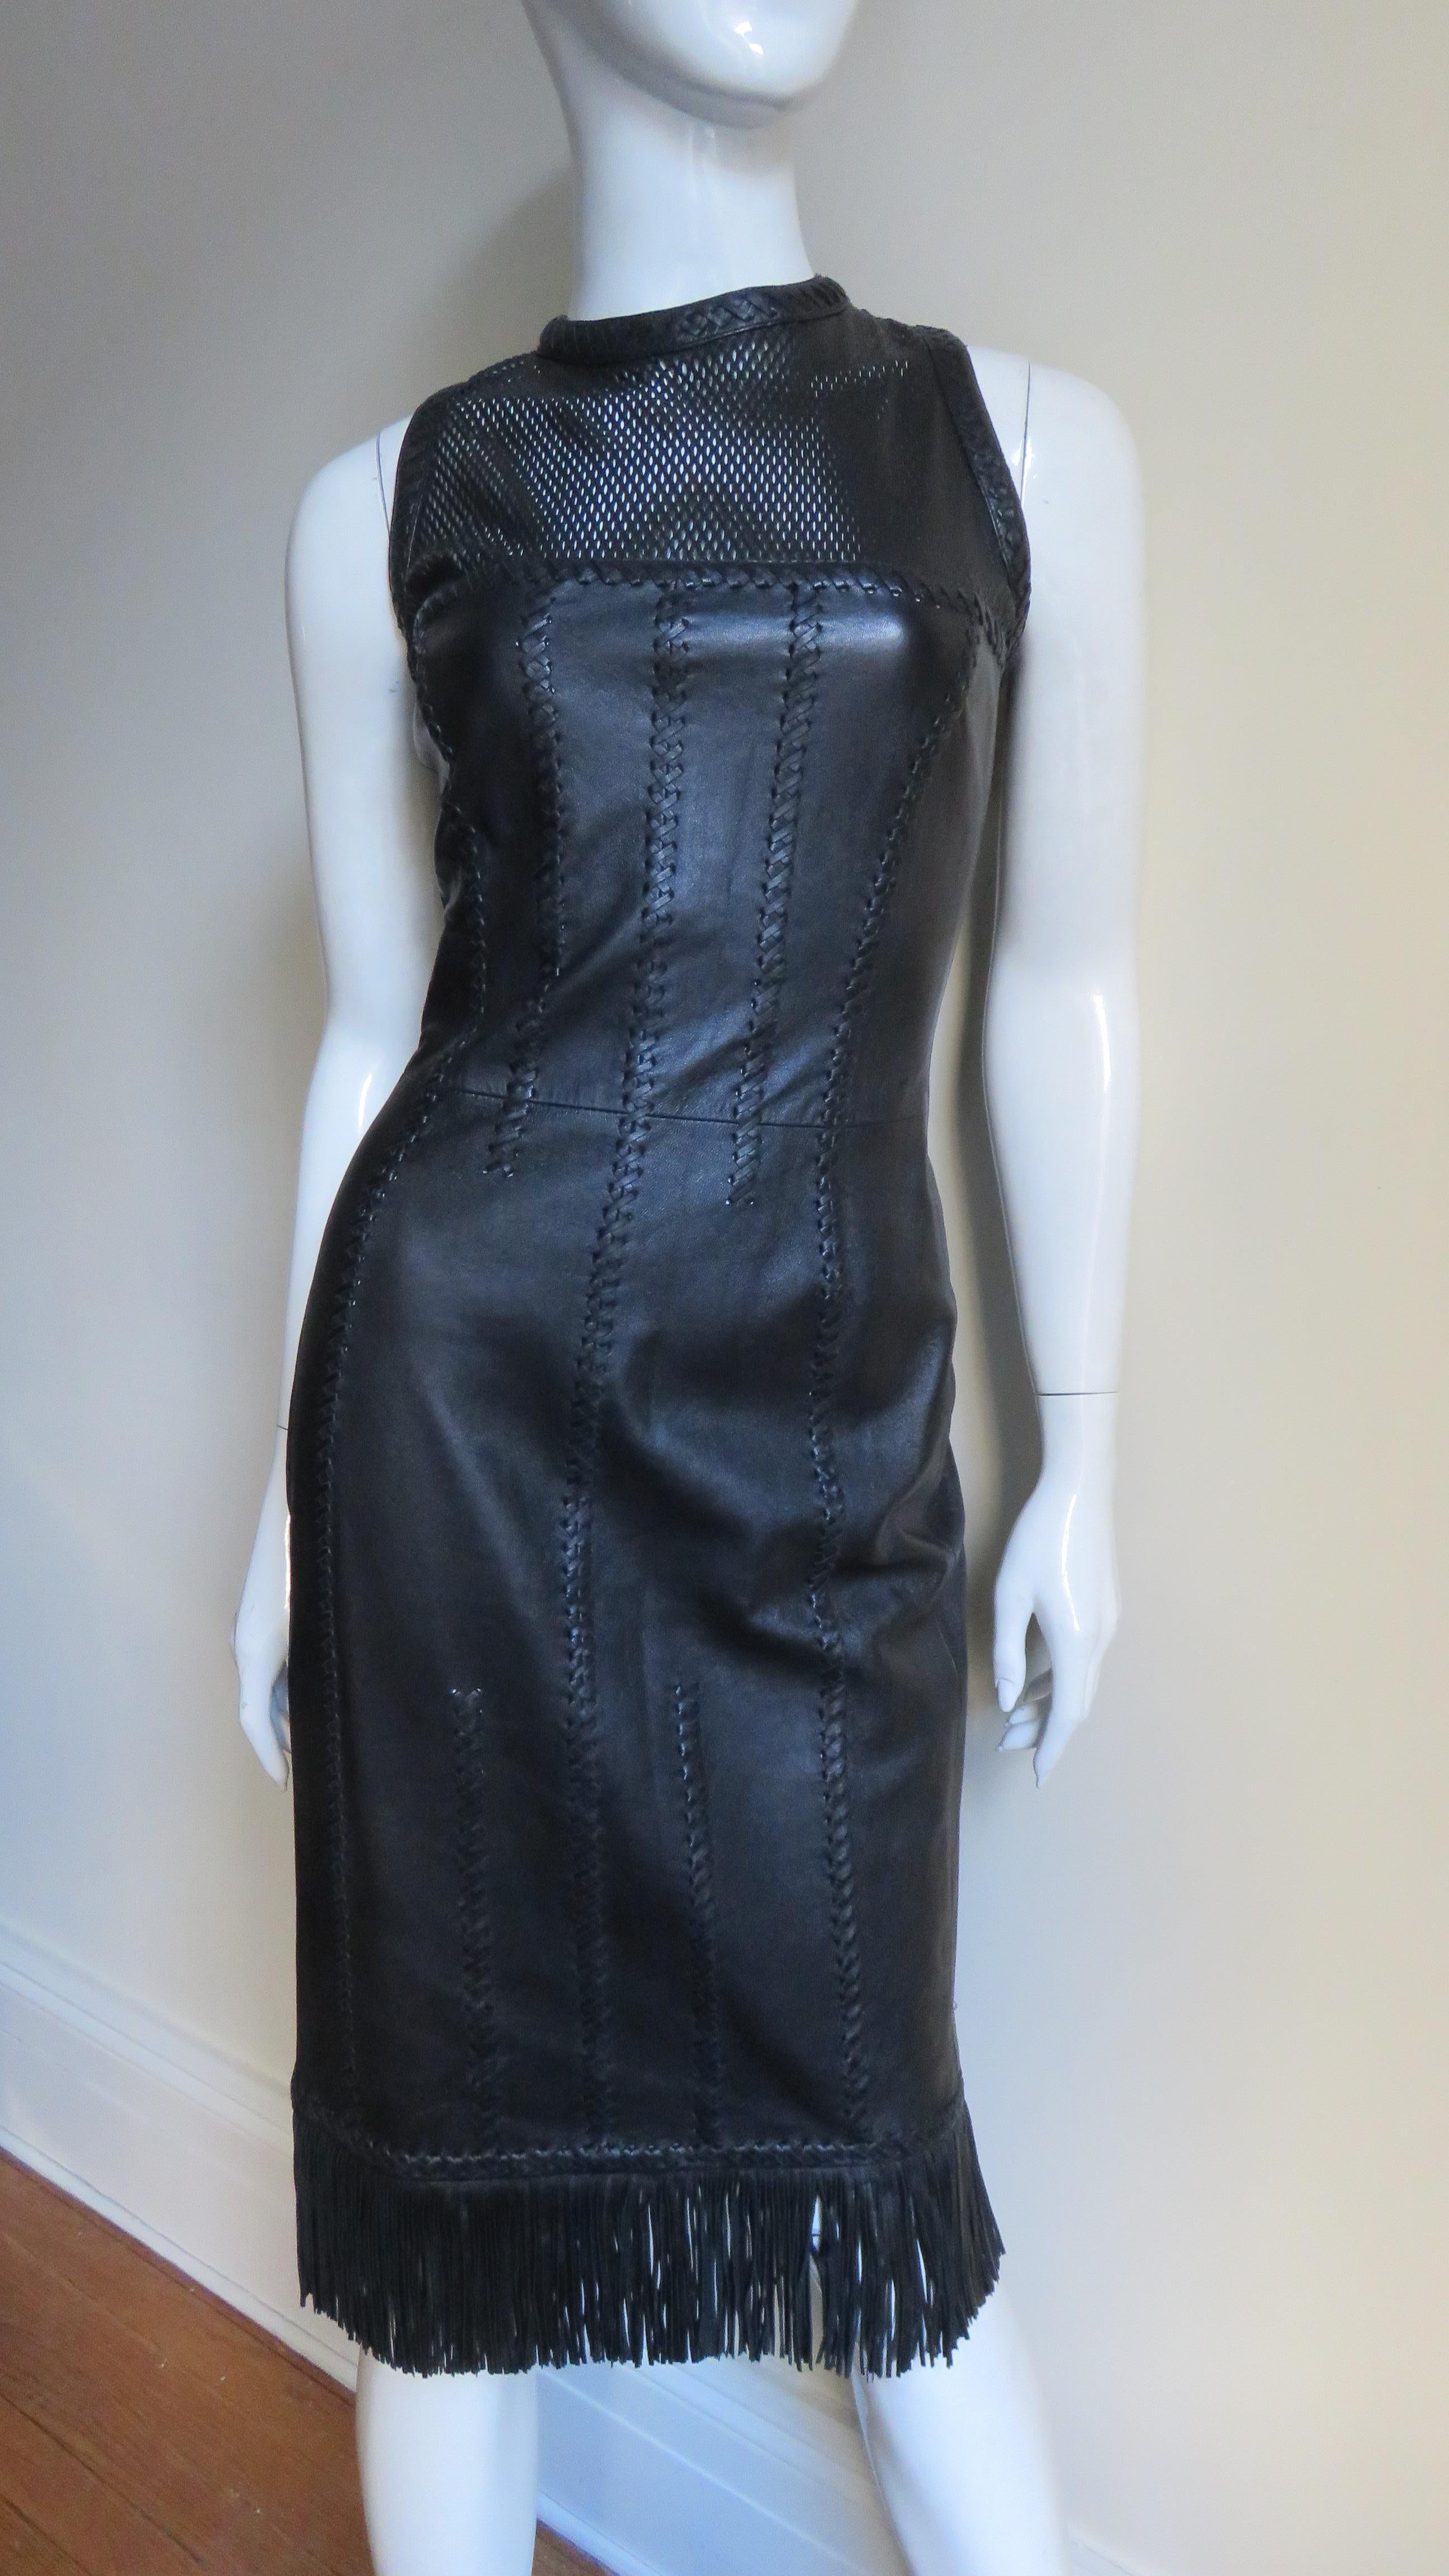 An extraordinary and collectible supple black leather dress from Gianni Versace. This has all of the couture details Versace is known for- a fine fringe hem, laser perforated leather at the upper chest and elaborate seaming highlighted with leather